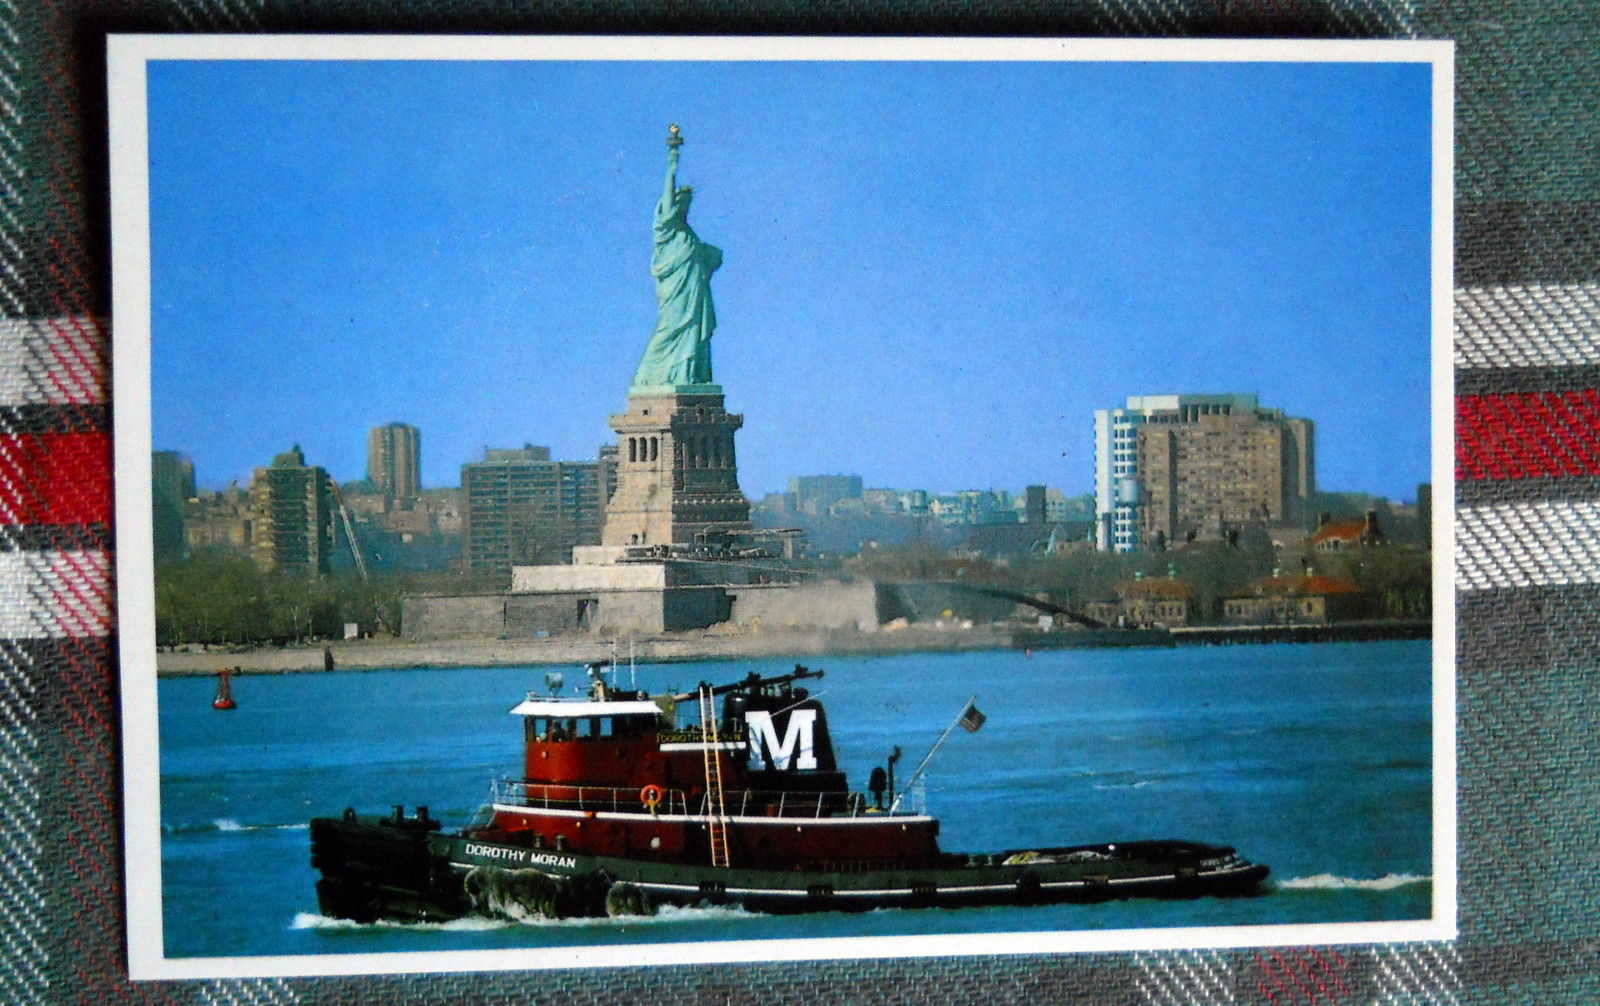 New York City STATUE OF LIBERTY with tugboat New Jersey background POSTCARD.jpg